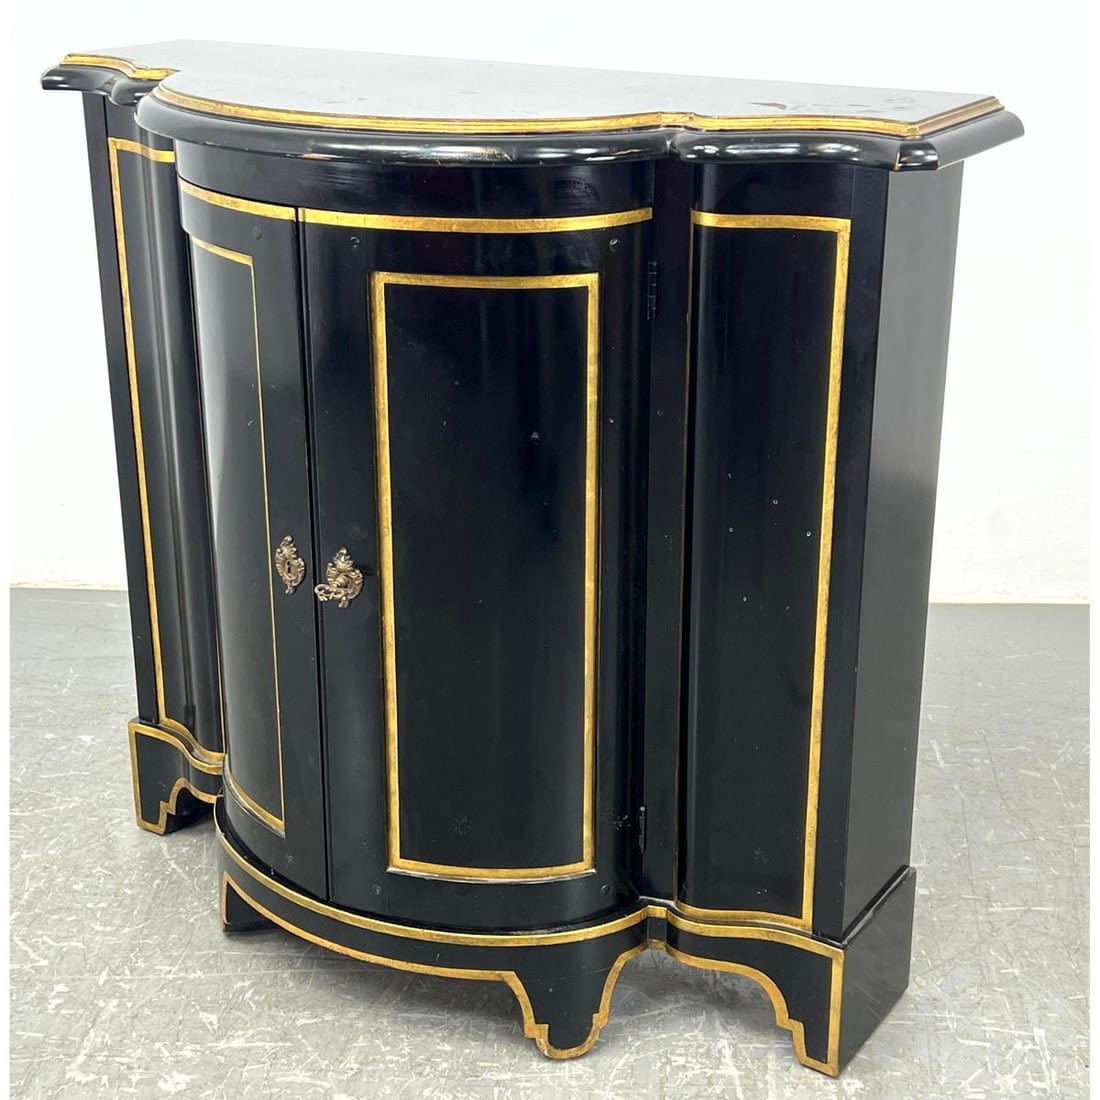 Black Lacquer Bow front Server 3cf2a9